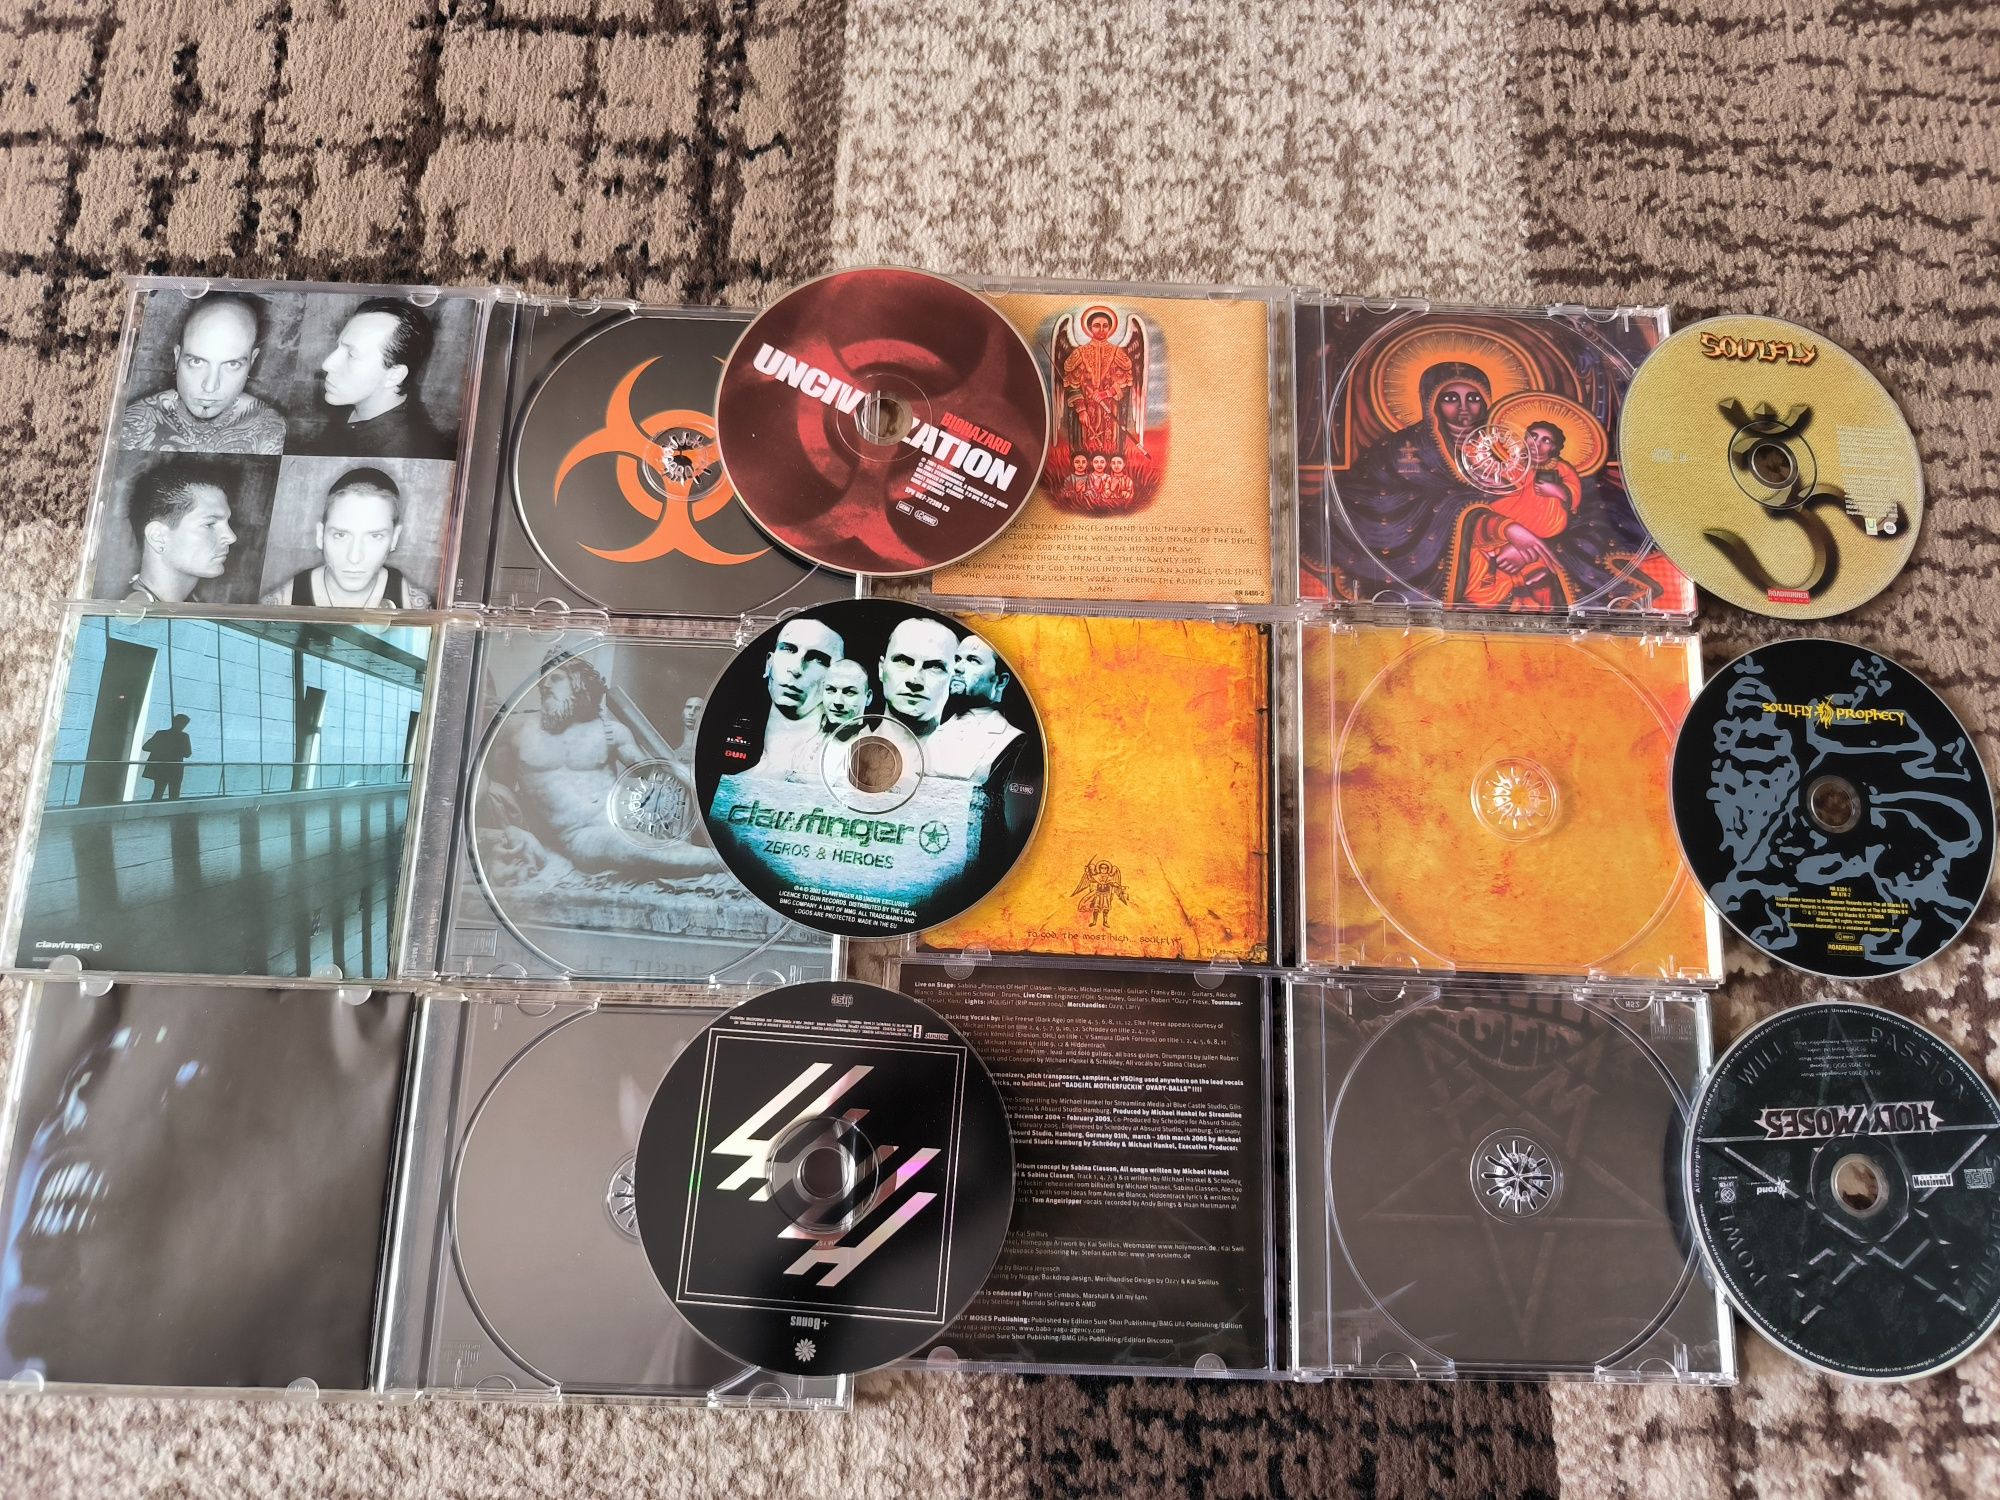 CD - Soulfly, Holy Moses, Marlyn Manson, Biohazard, Clawfinger